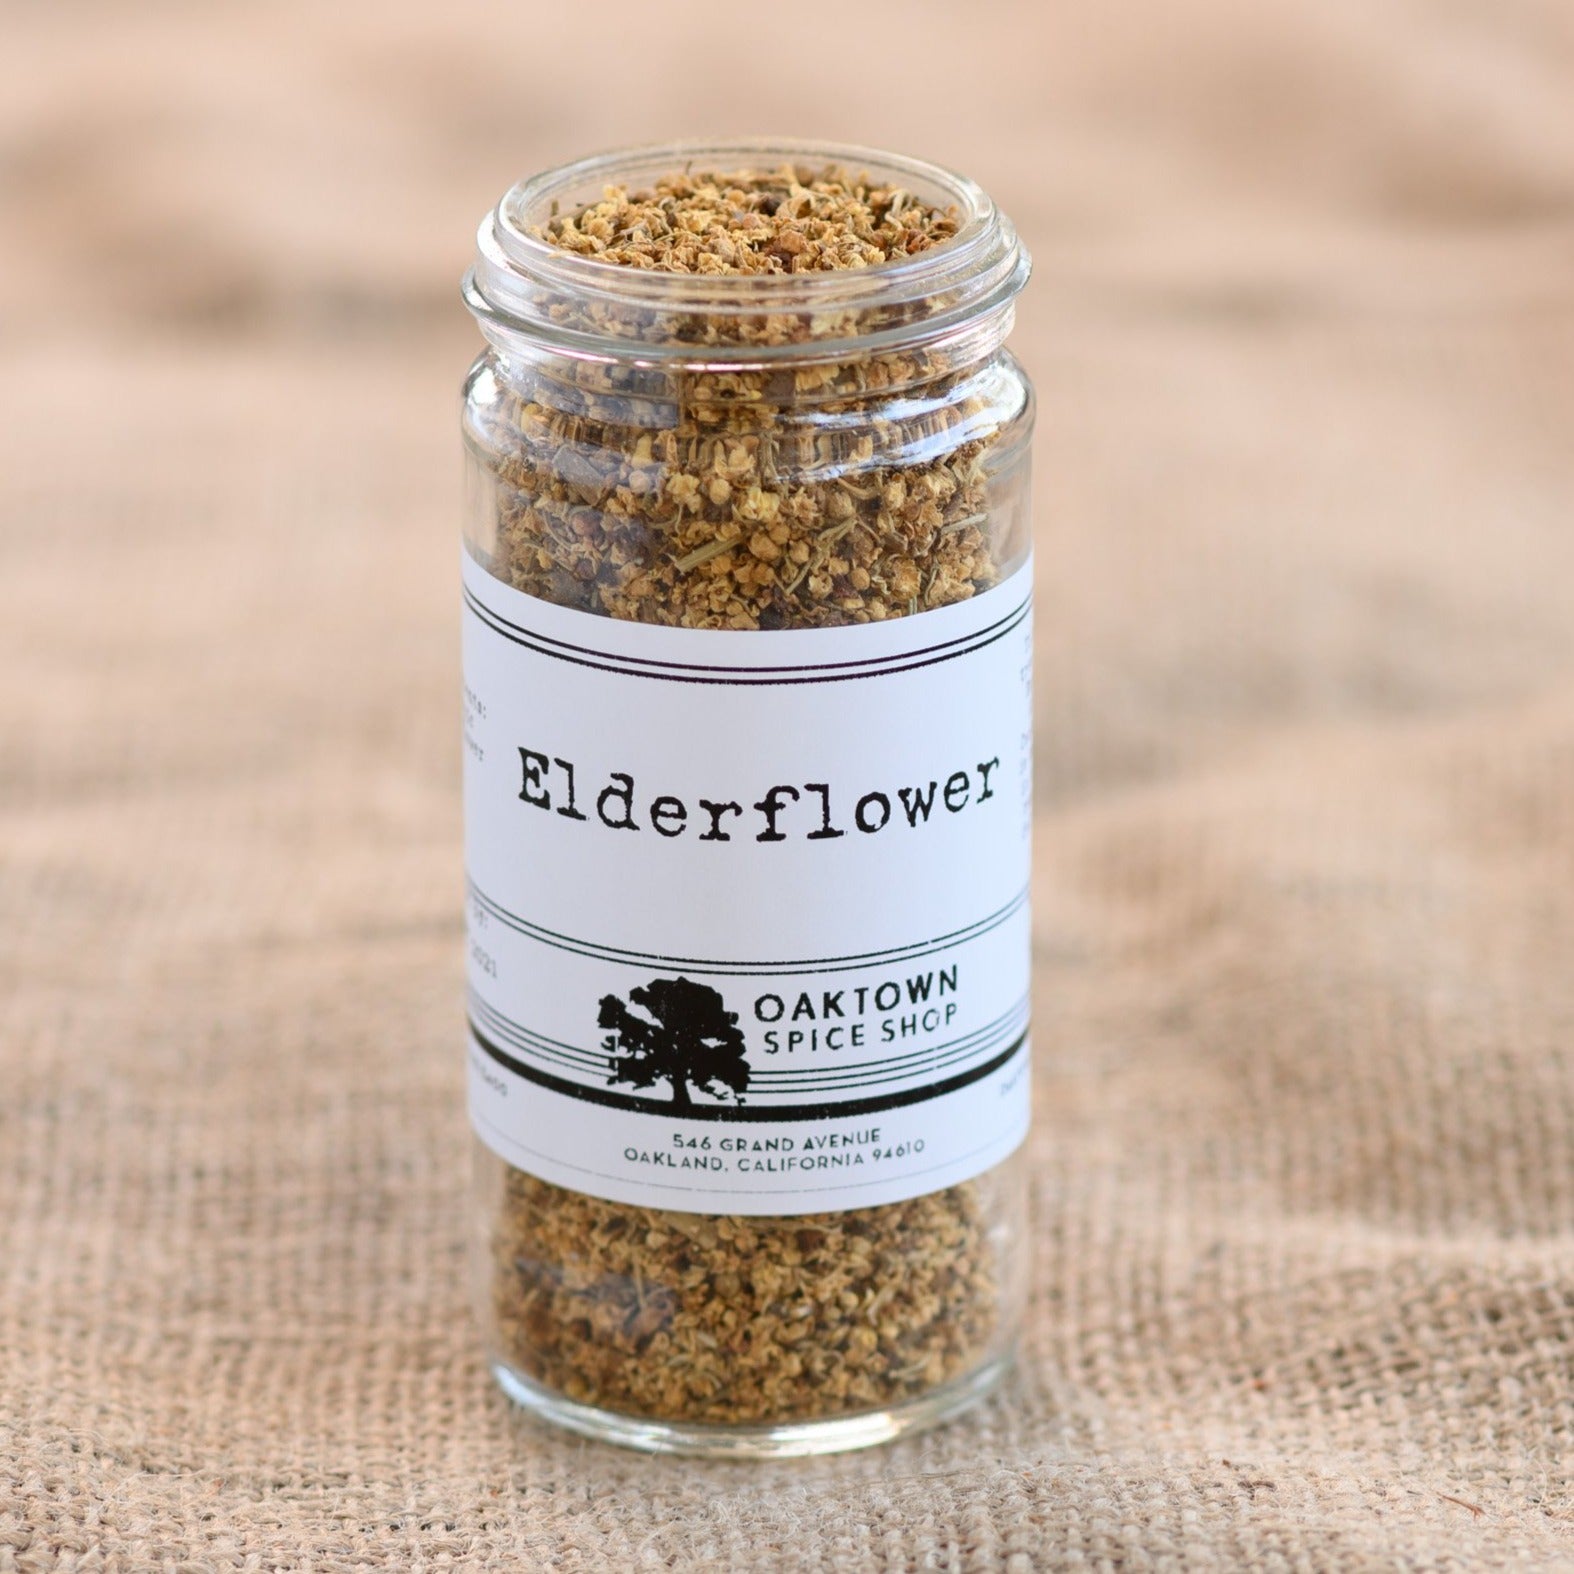 Elderflower from Oaktown Spice Shop is commonly used in cordials and teas and has a delicate sweet flavor